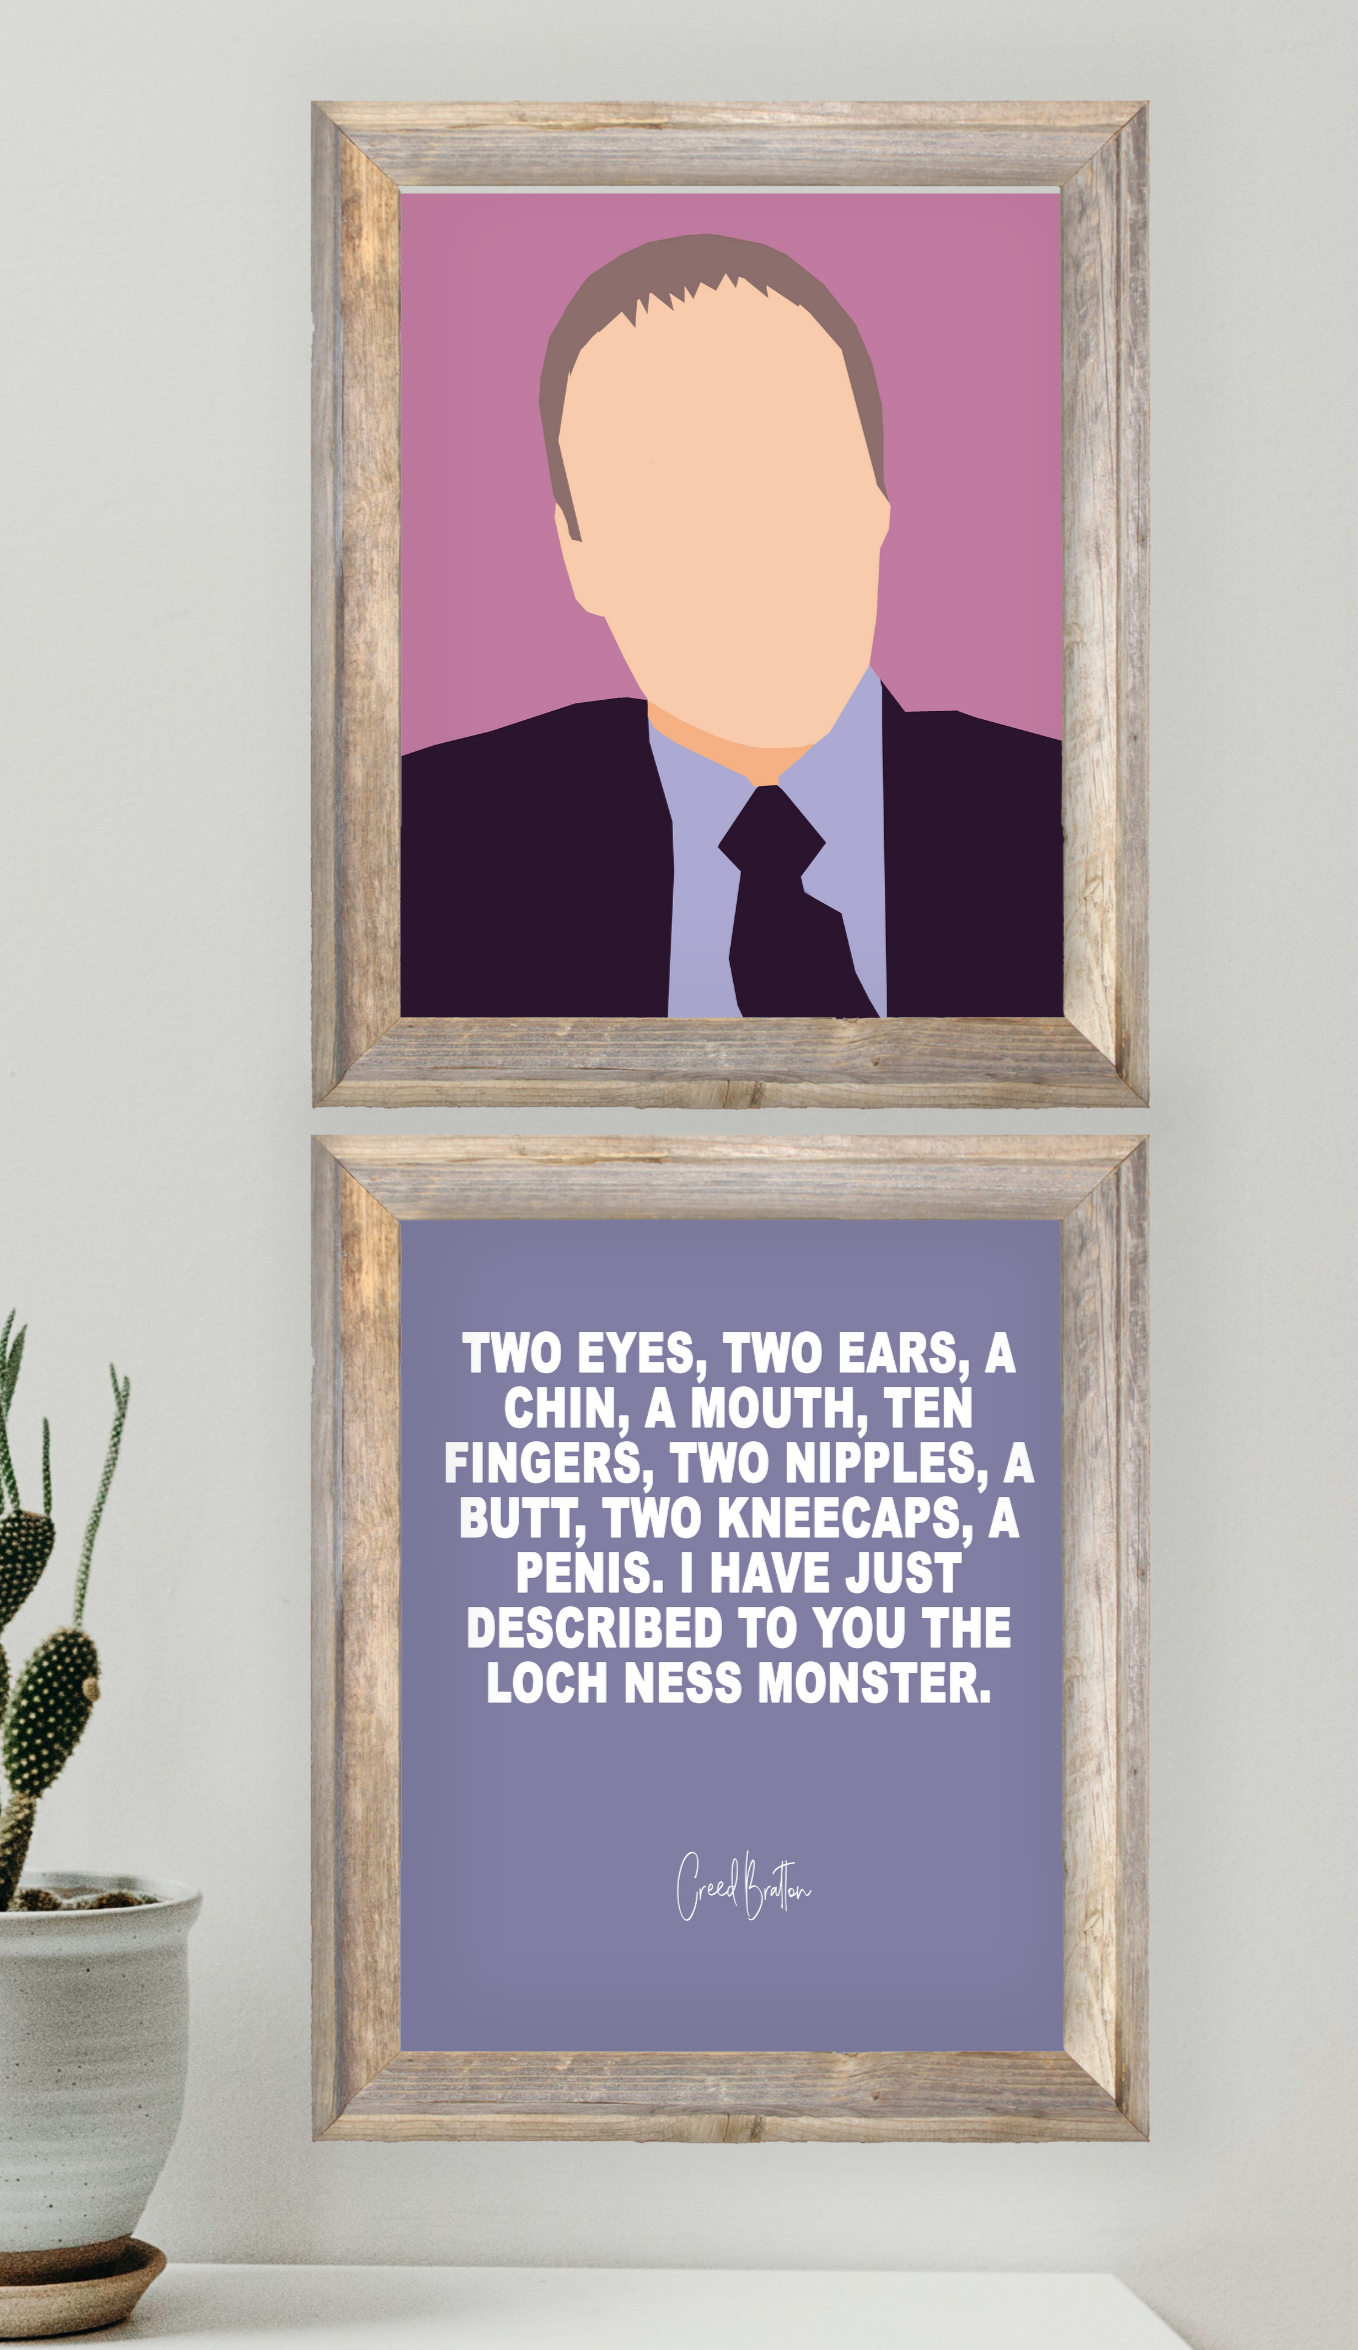 Creed Bratton - Loch Ness Monster quote from The Office